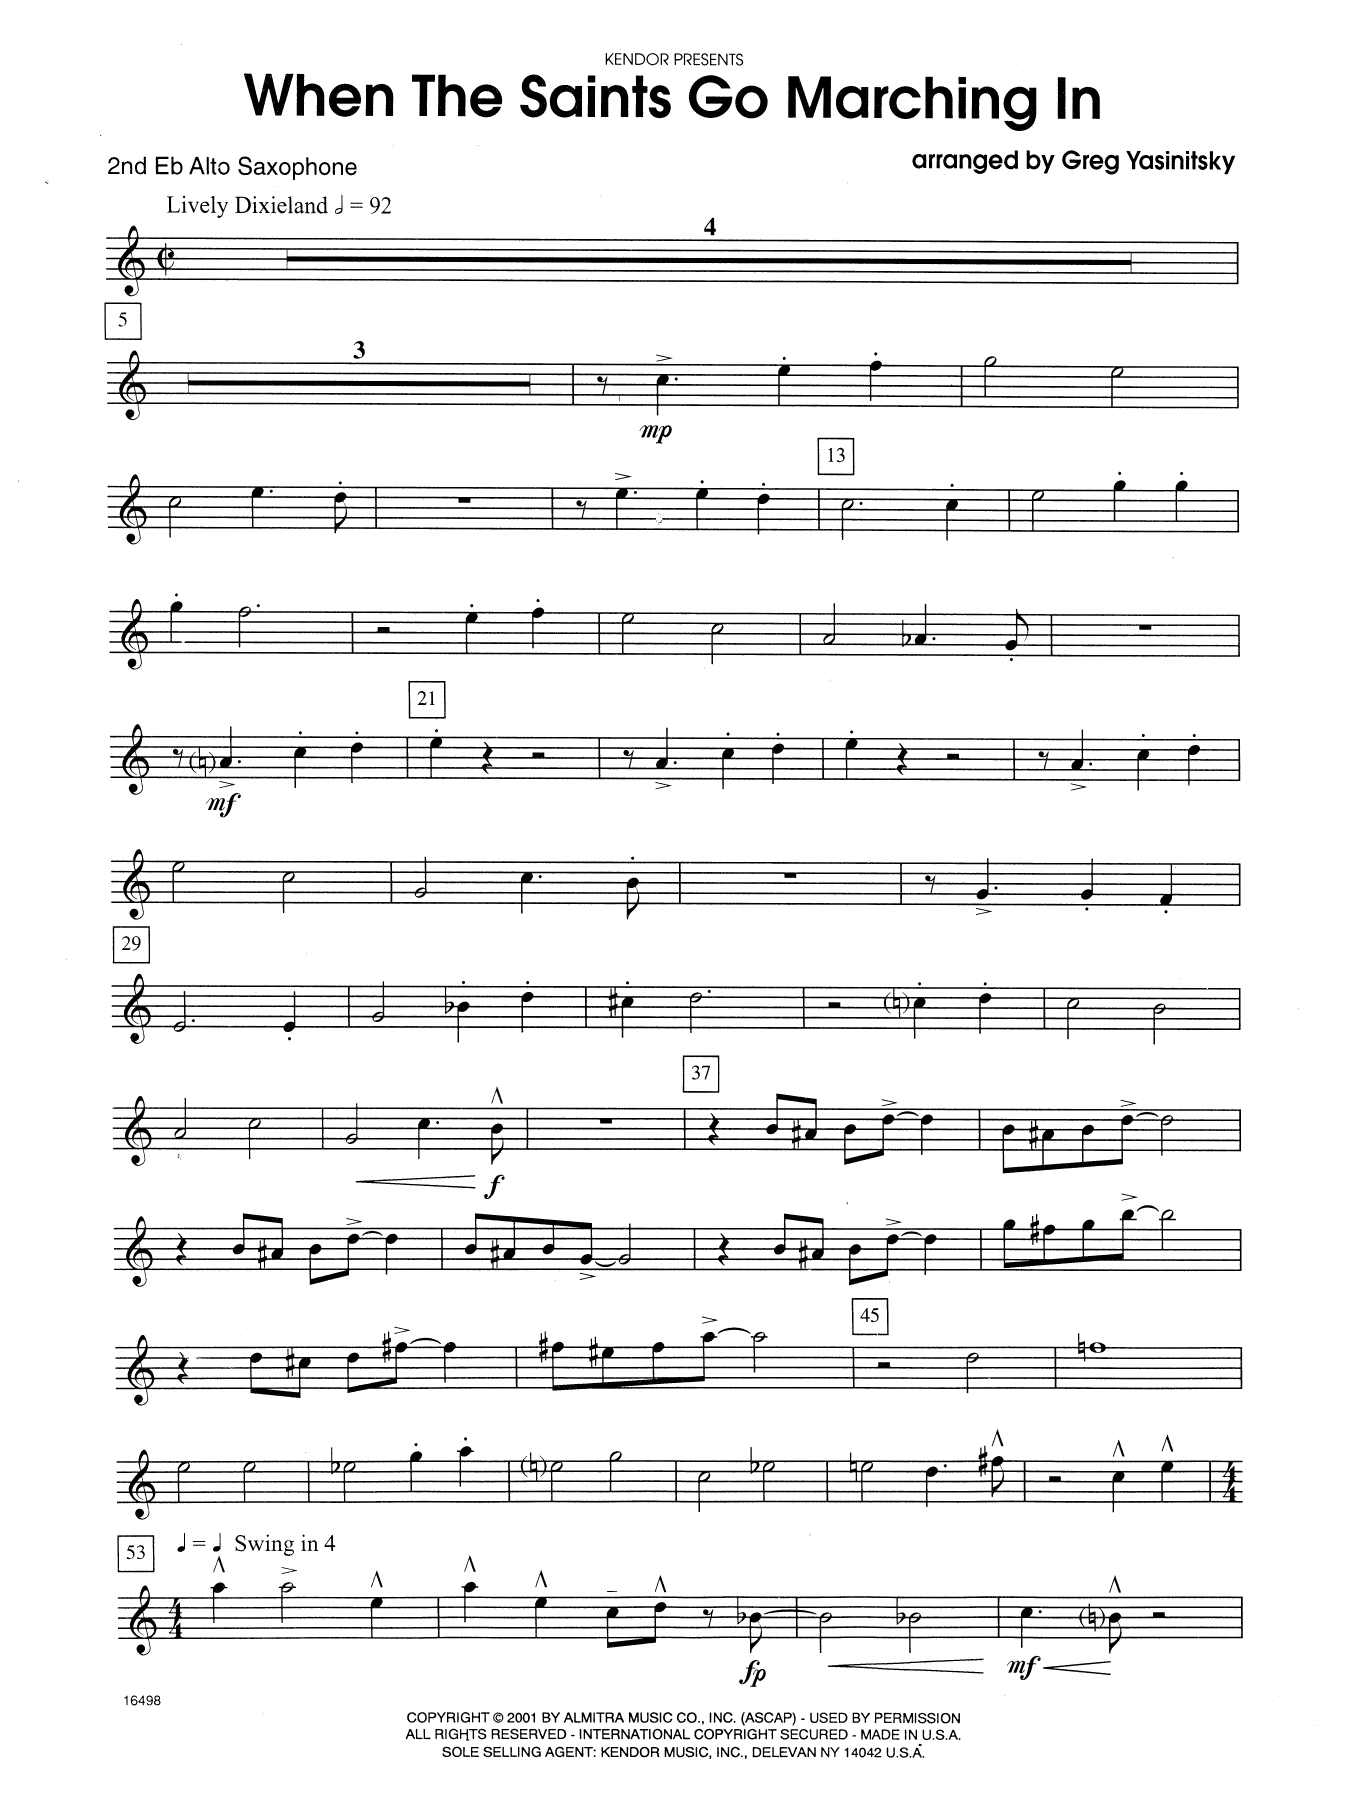 Download Gregory Yasinitsky When the Saints Go Marching In - 2nd Eb Sheet Music